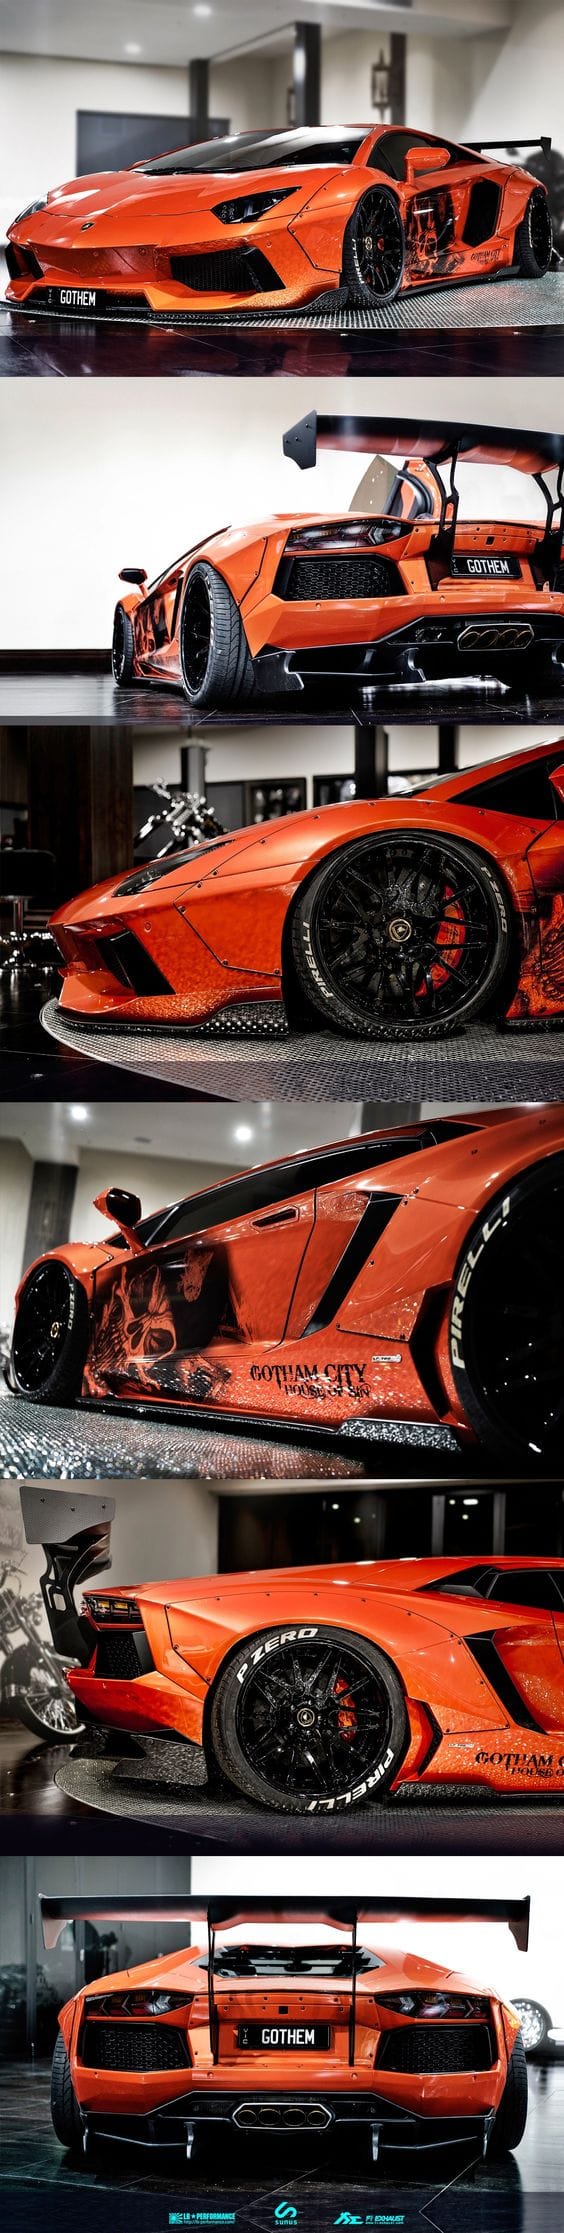 What Do You Think Of The New ''Lamborghini Aventador Liberty Walk” Best New Concept Car For The Future